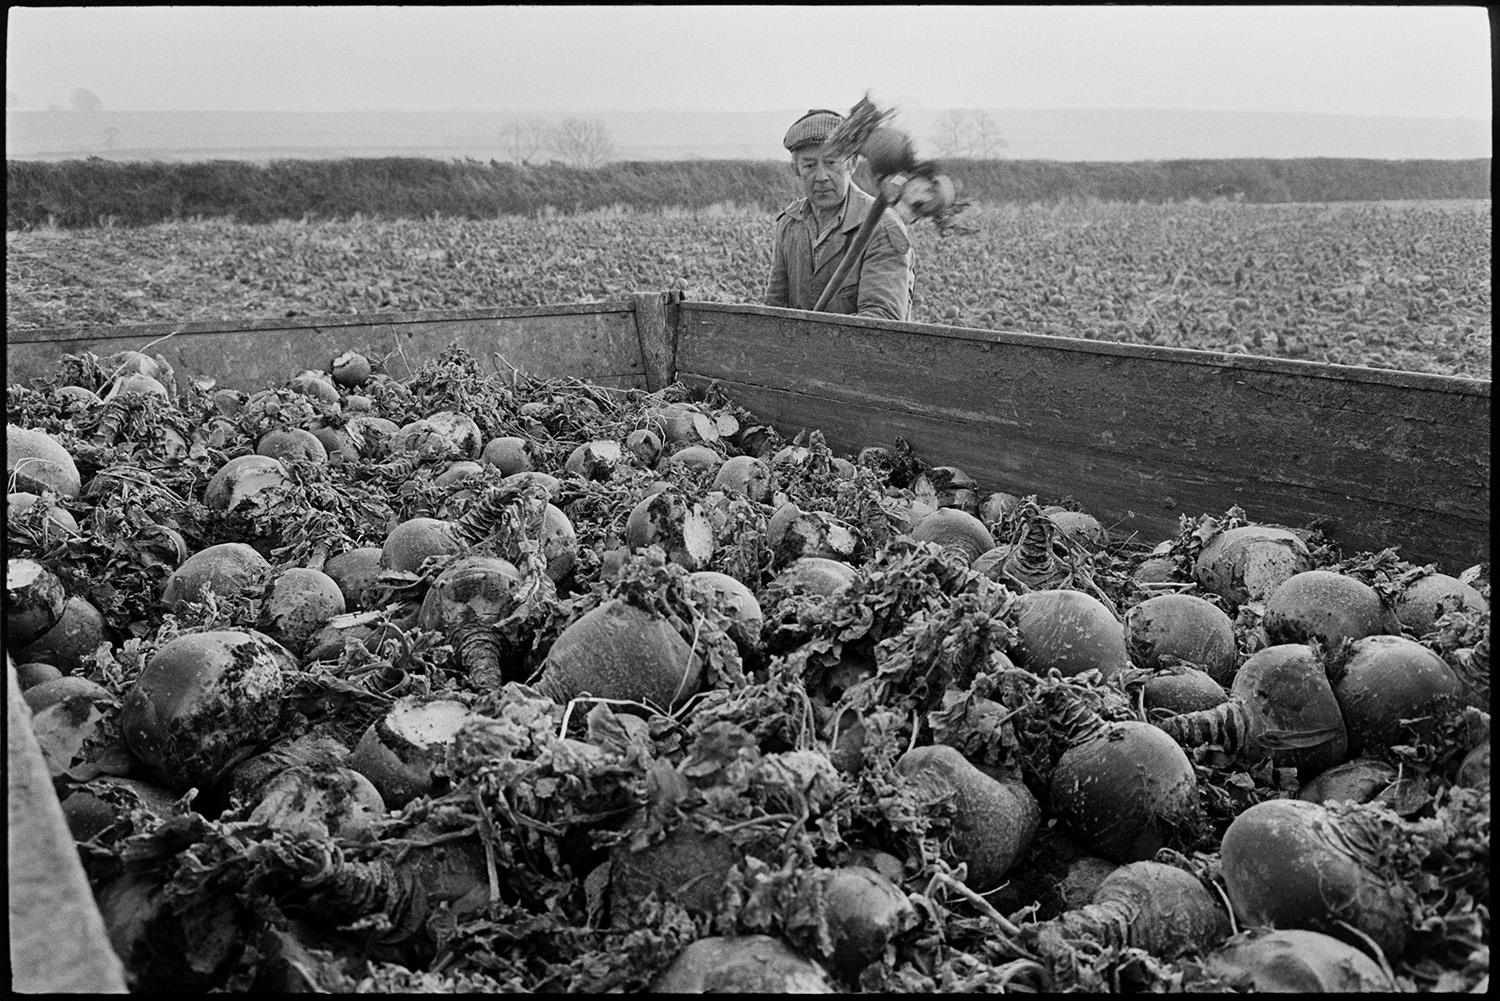 Farmers harvesting beet. 
[Mr Stoneman harvesting a crop of beet in a field at Skerries, Riddlecombe. He is putting the beet into a trailer.]